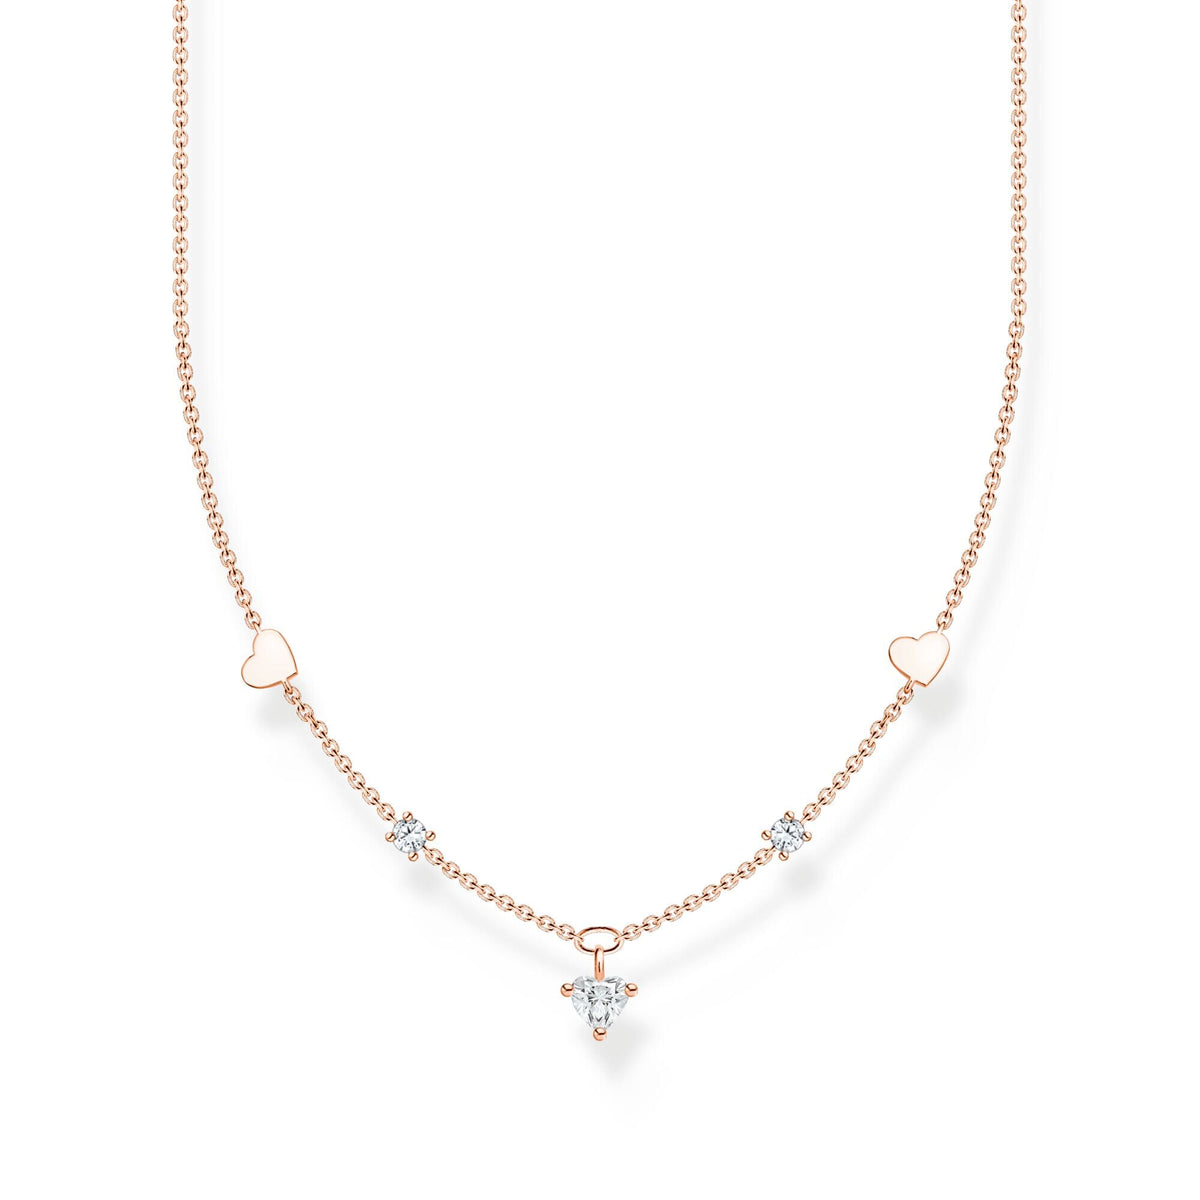 Thomas Sabo Necklace with hearts and white stones rose gold Necklaces Thomas Sabo 